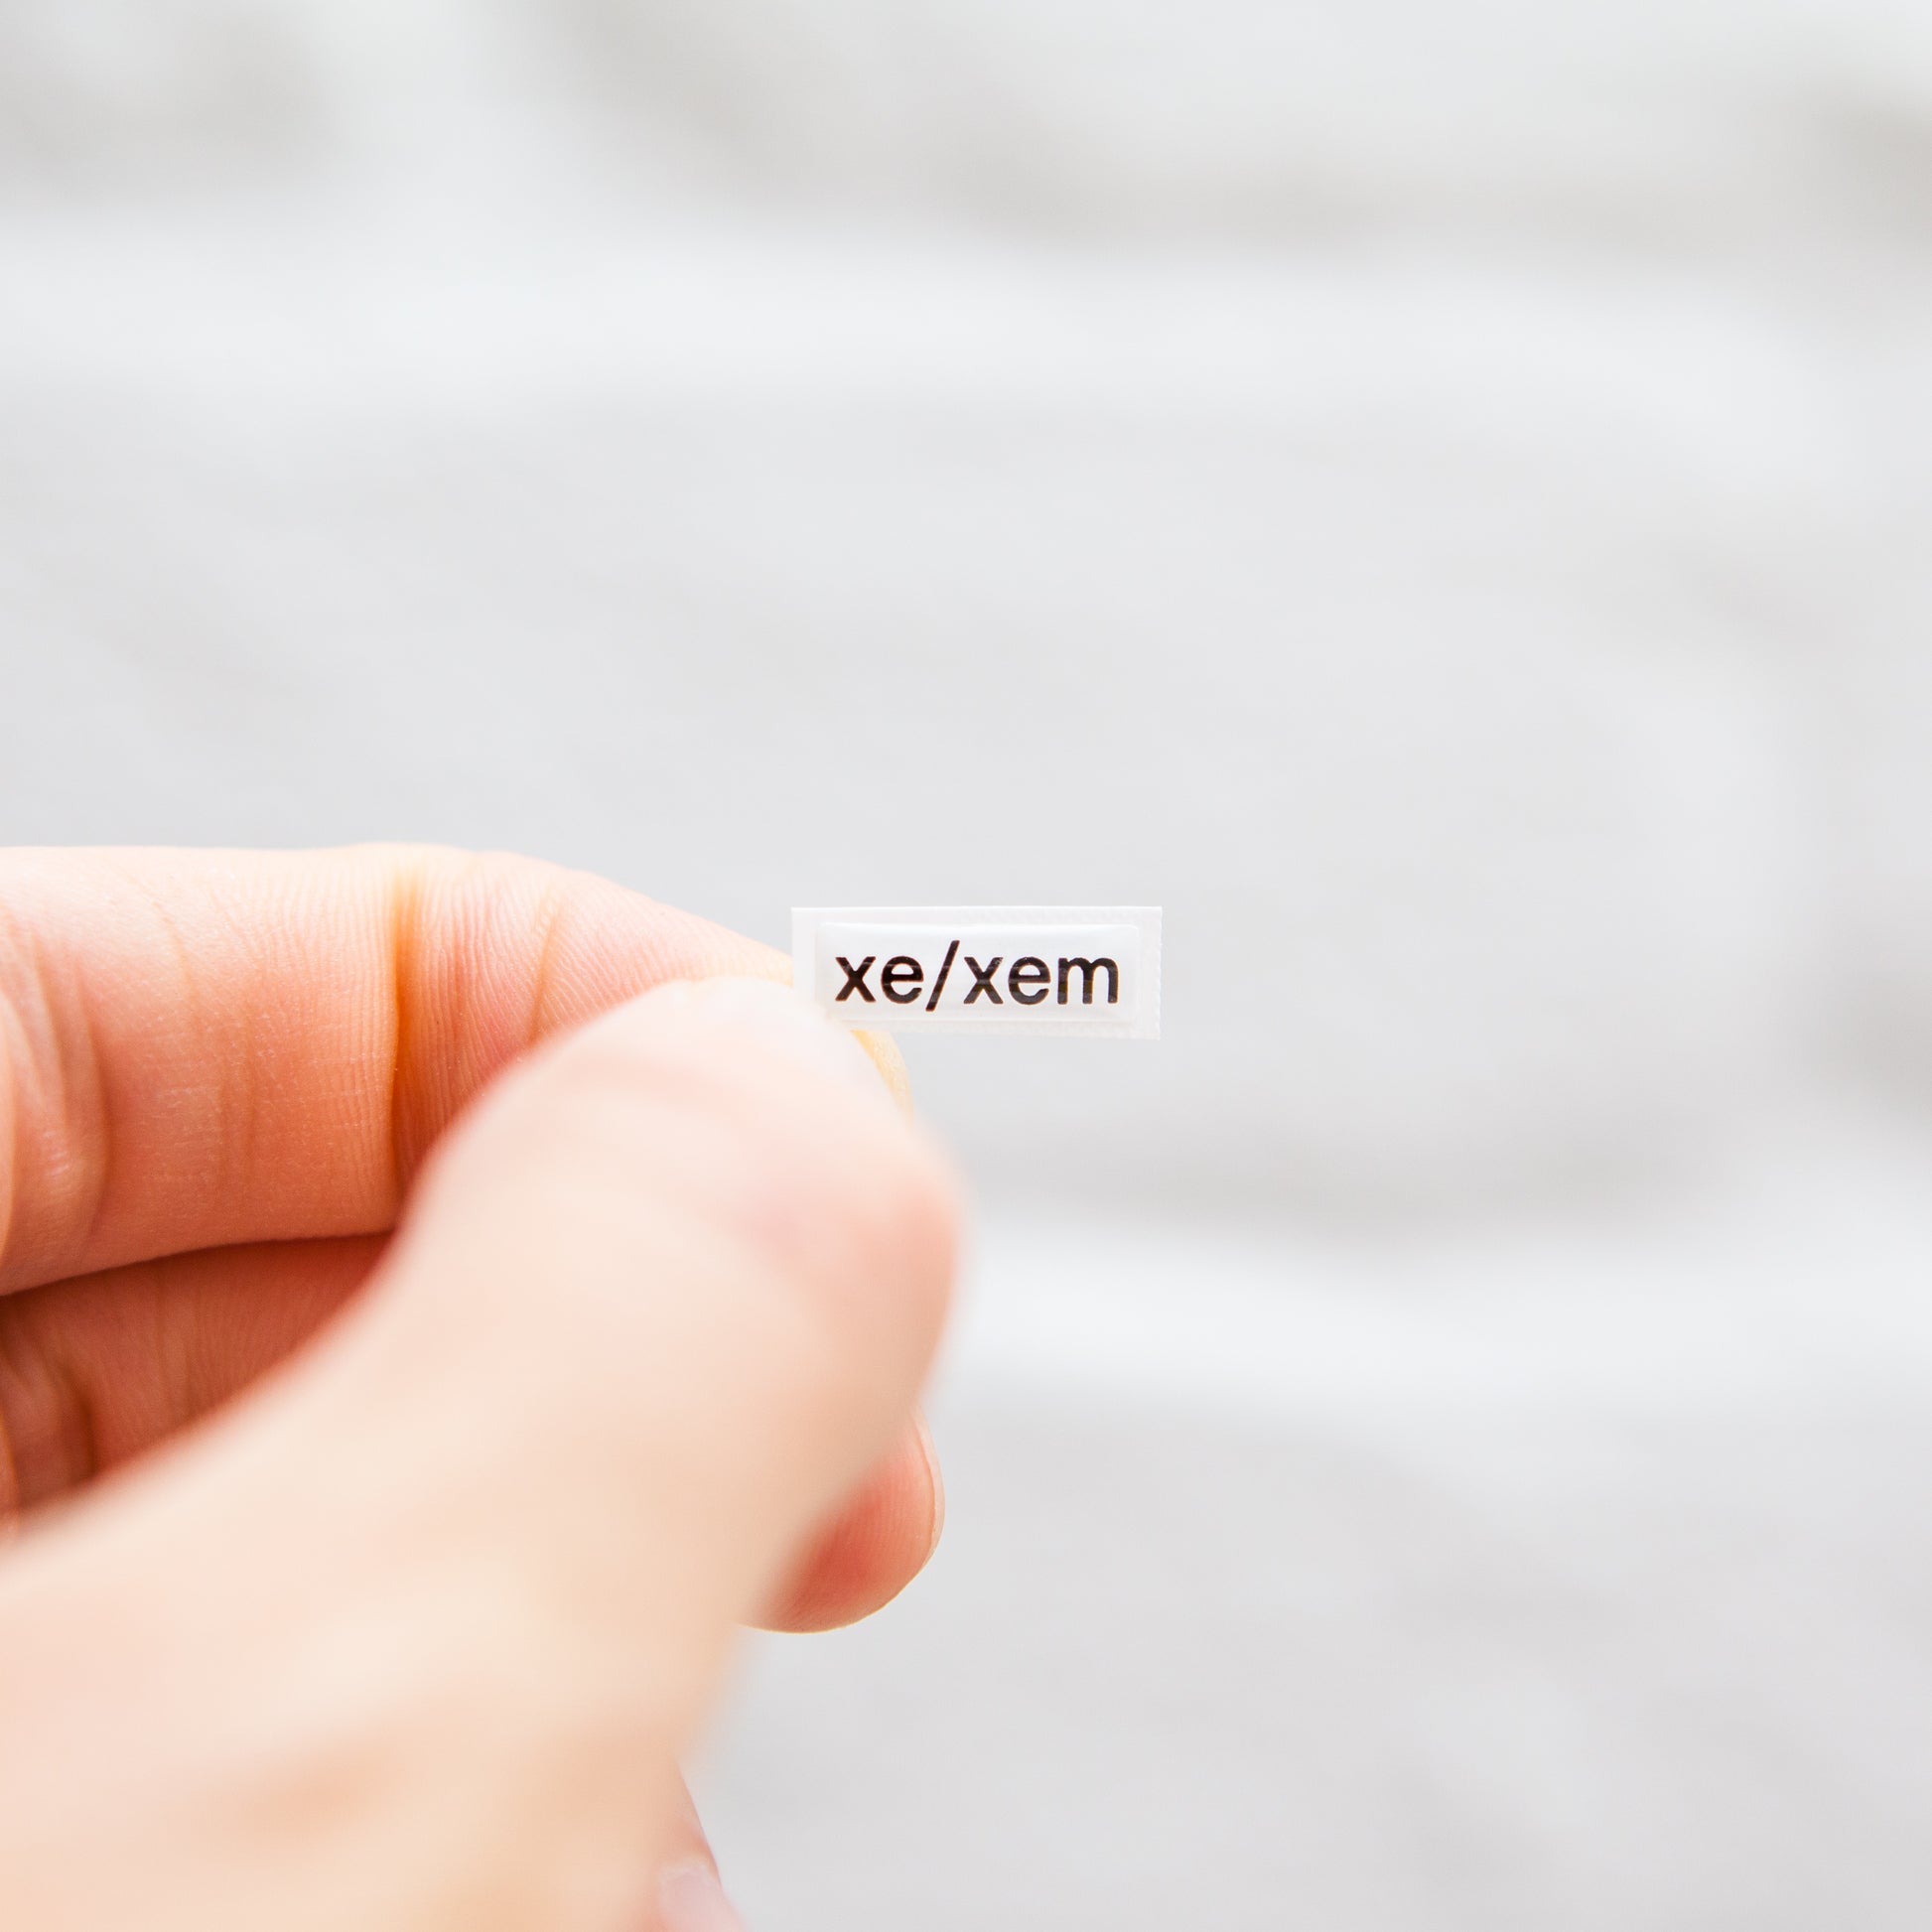 A white sticker with black text displaying xe/xem pronouns, designed for name badges and ID tags. A high-quality pronoun sticker with durable epoxy resin. This pronouns sticker for name badges.